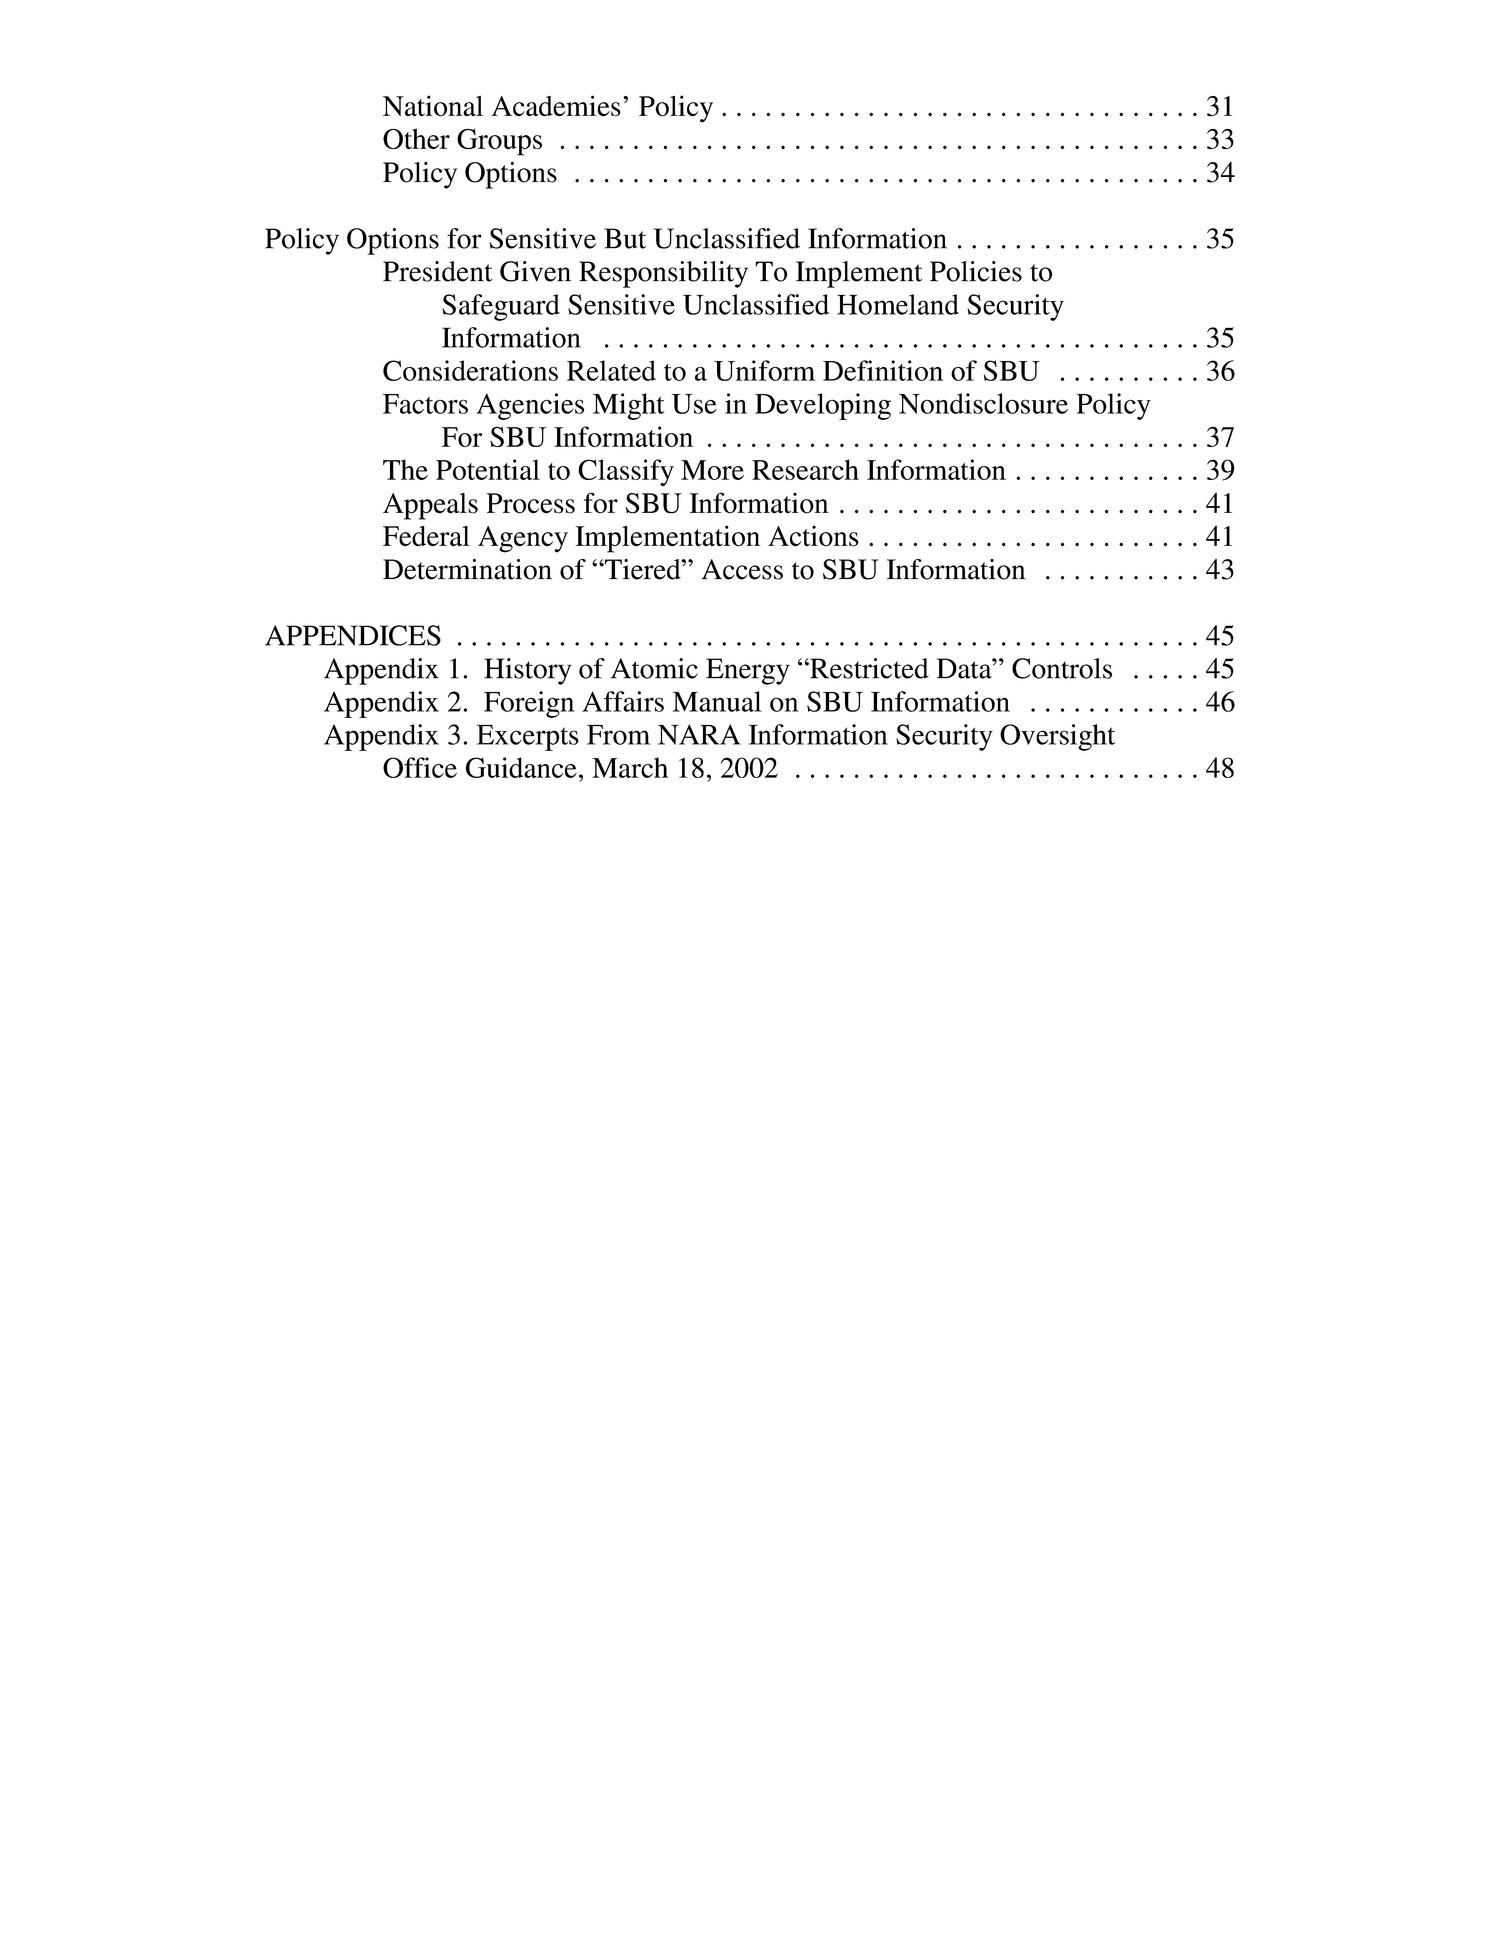 "Sensitive But Unclassified" and Other Federal Security Controls on Scientific and Technical Information: History and Current Controversy
                                                
                                                    [Sequence #]: 4 of 52
                                                